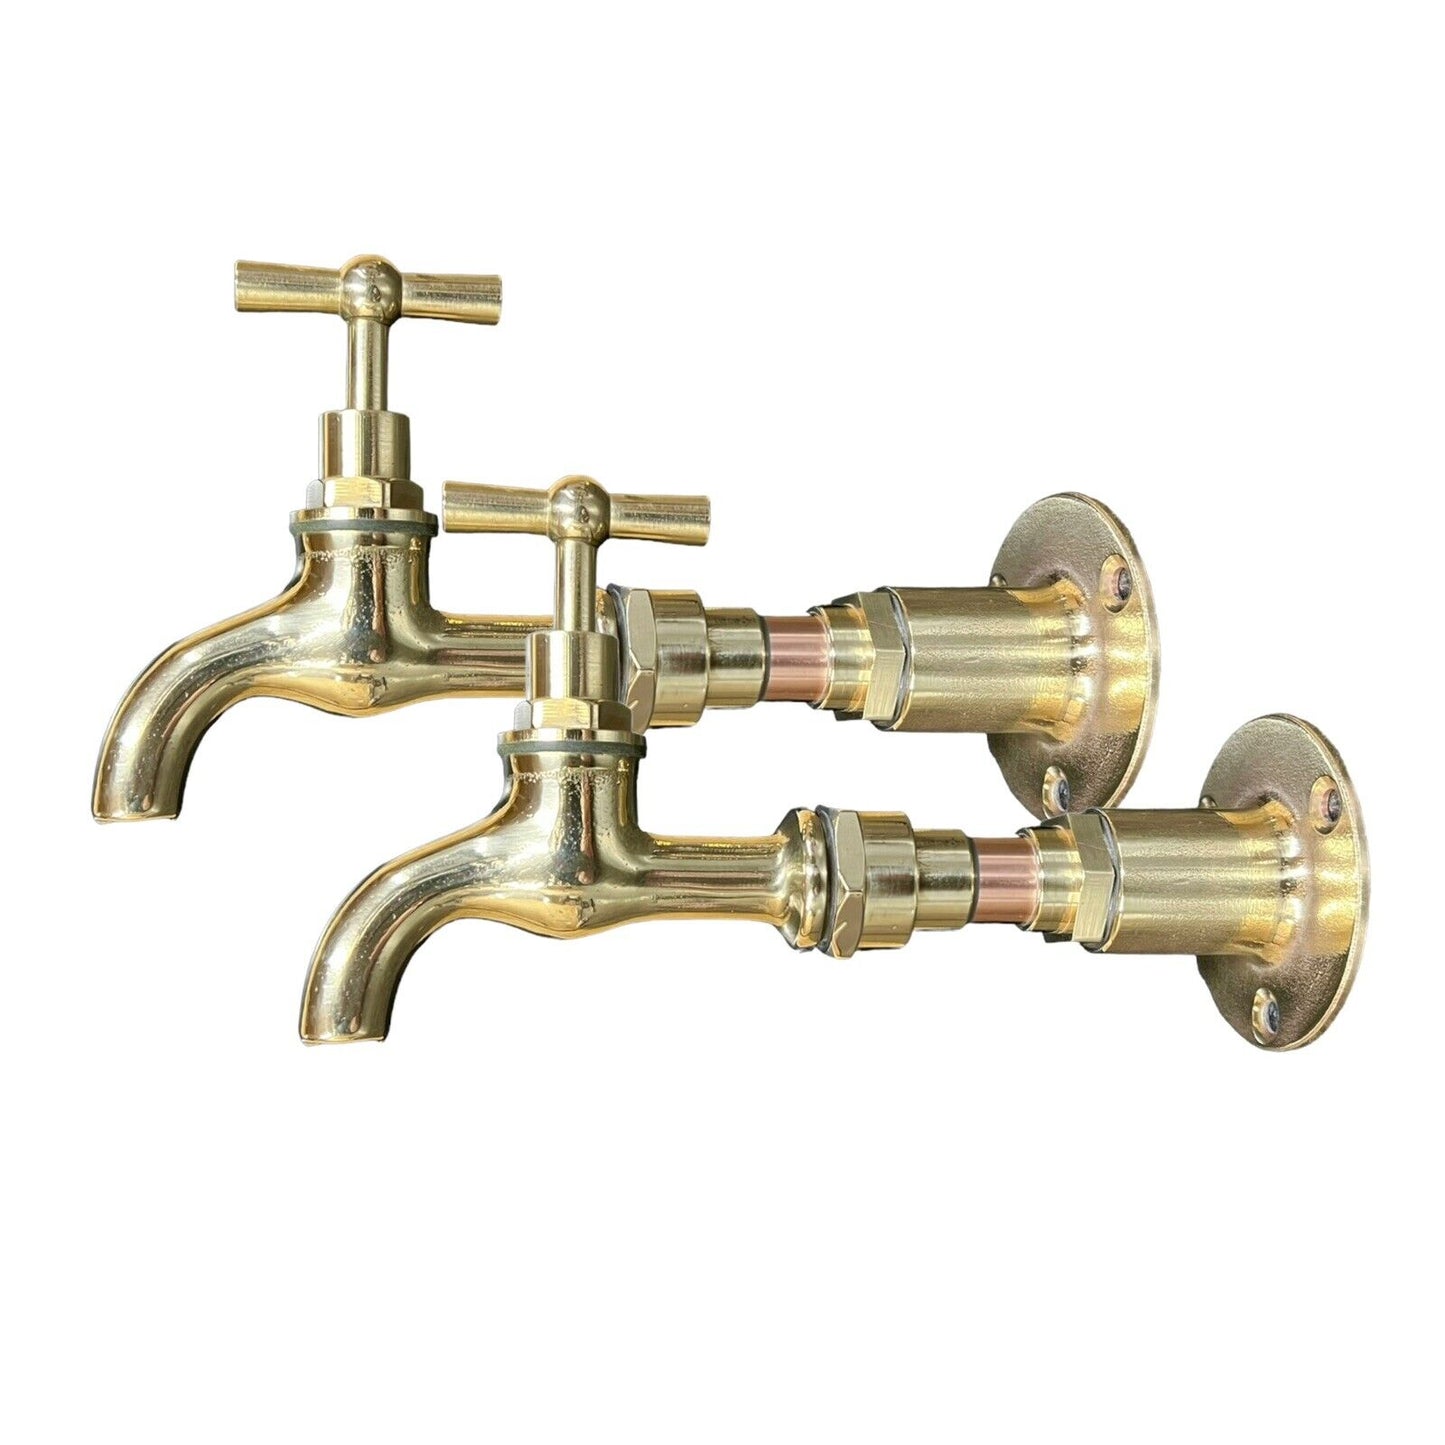 handmade copper and brass wall mounted taps sold by All Things French Store